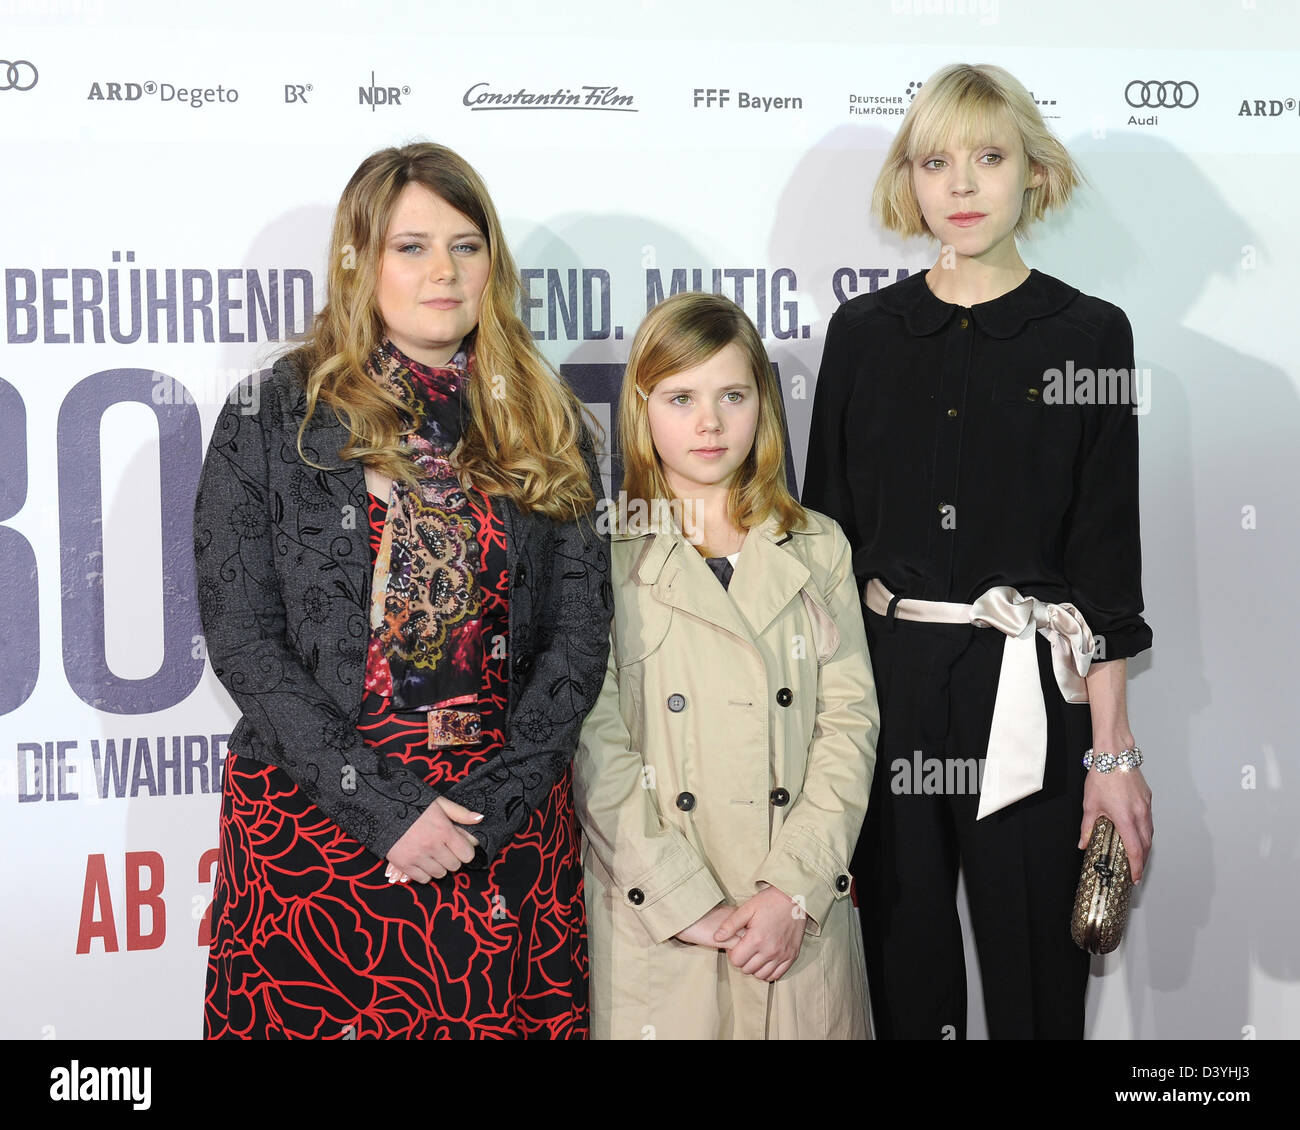 Munich, Germany. 26th February 2013. The former abduction victim Natascha Kampusch (L)  and actress Amelia Pidgeon, who plays the part of Kampush as a littel girl, and actress  Antonia Campbell- Hughes, who plays Kampush as a grown-up, attend the premier of the film '3096 Tage' (3096 Days) in Munich, Germany, 26 February 2013. The film retells the story of Kampusch and her abduction. The film will start in cinemas across Germany on 28 February 2013. Photo: Ursula Dueren/dpa/Alamy Live News Stock Photo